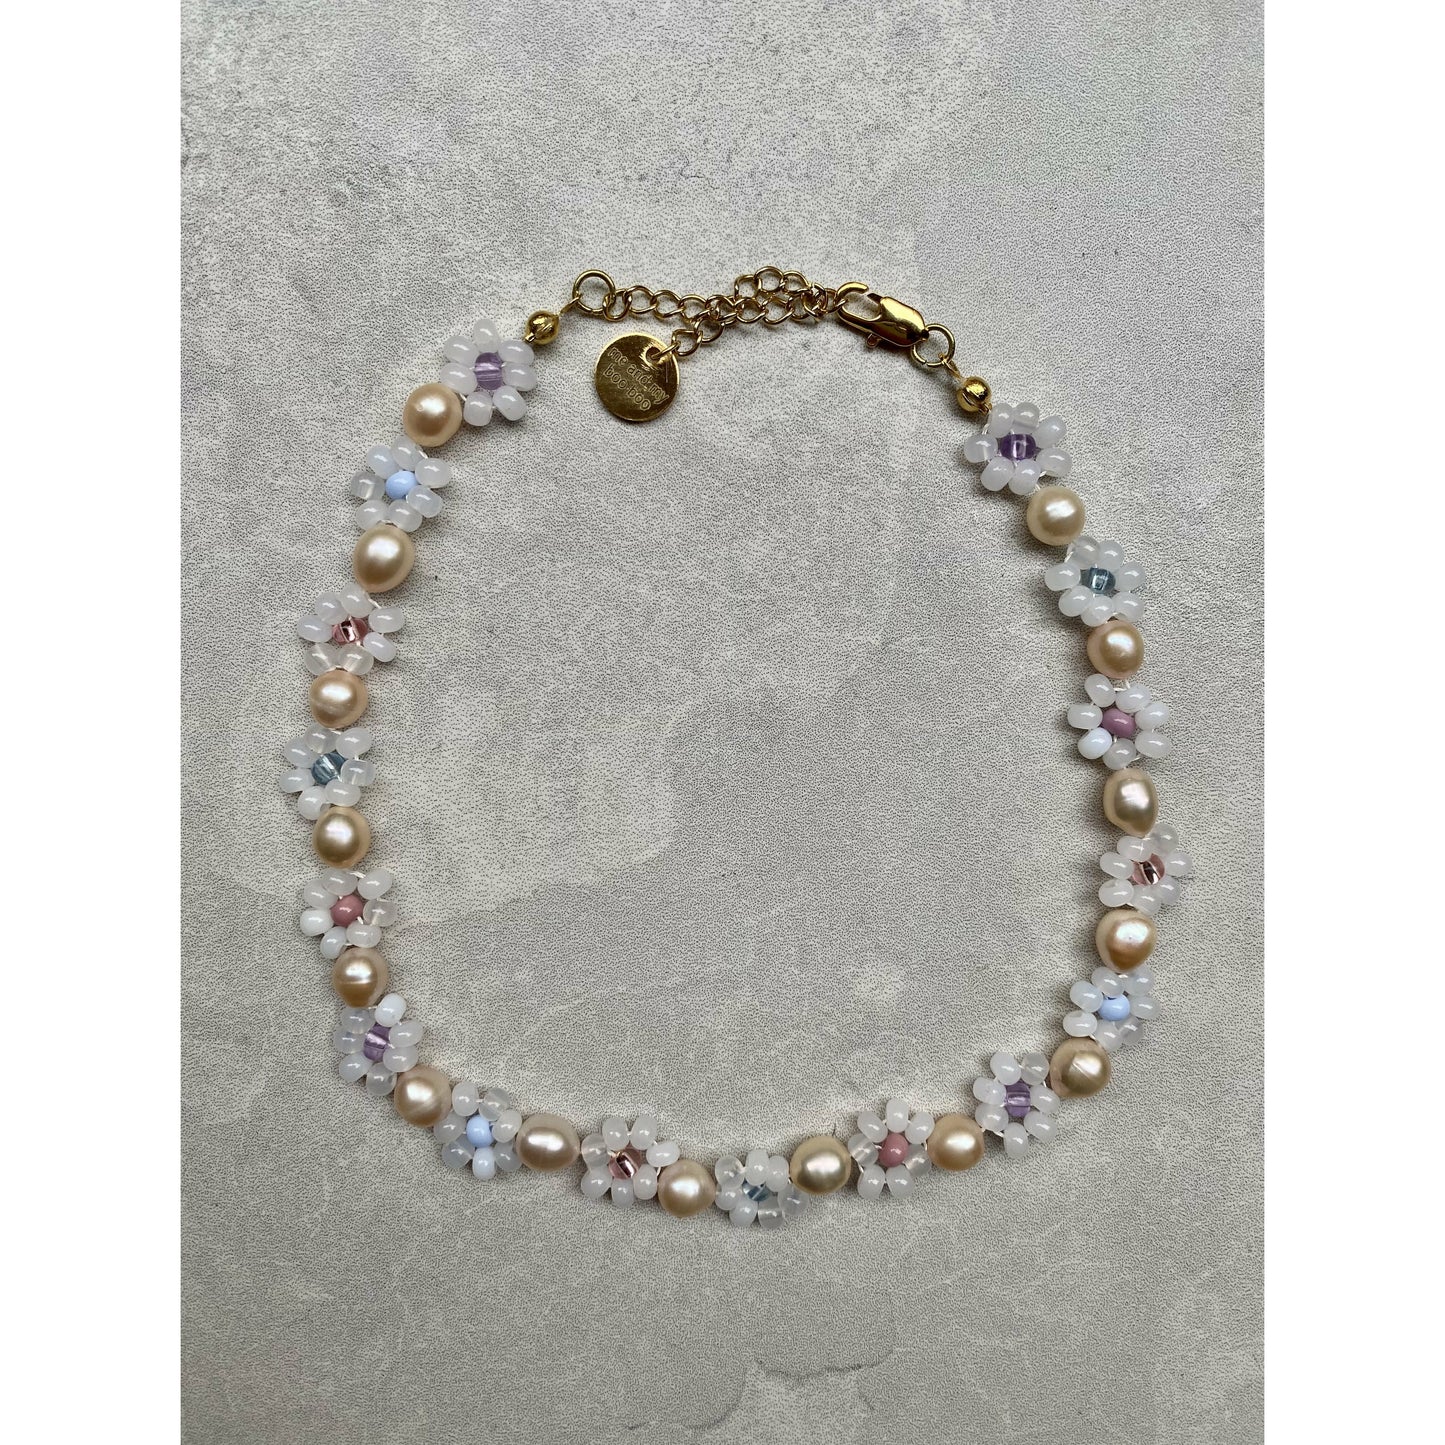 Flower necklace white pearl